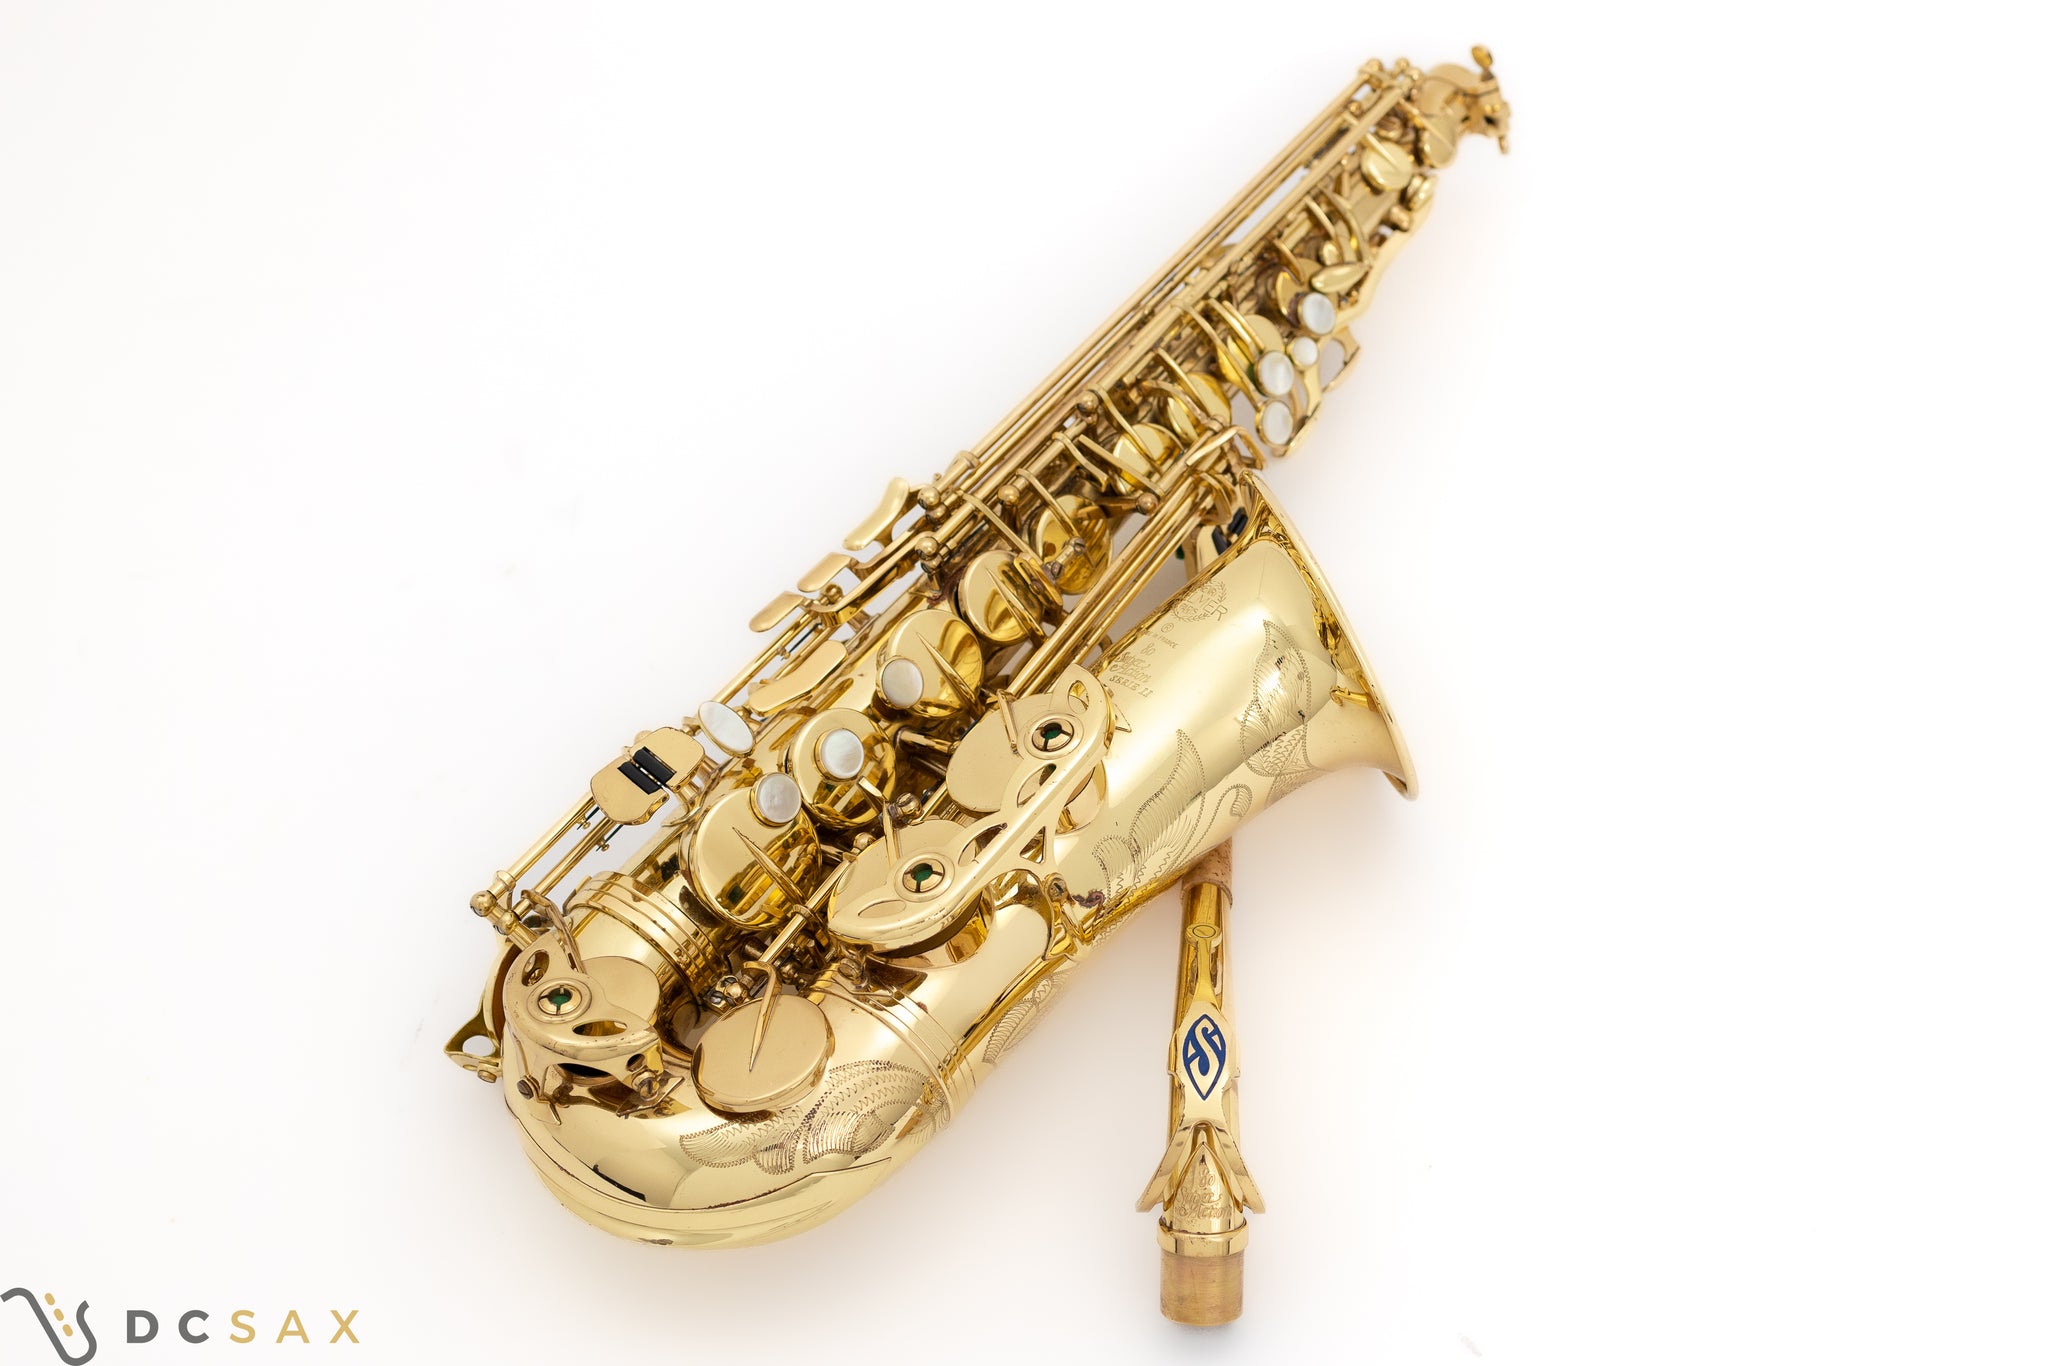 Selmer Super Action Series II Alto Saxophone, Excellent Condition, Just Serviced